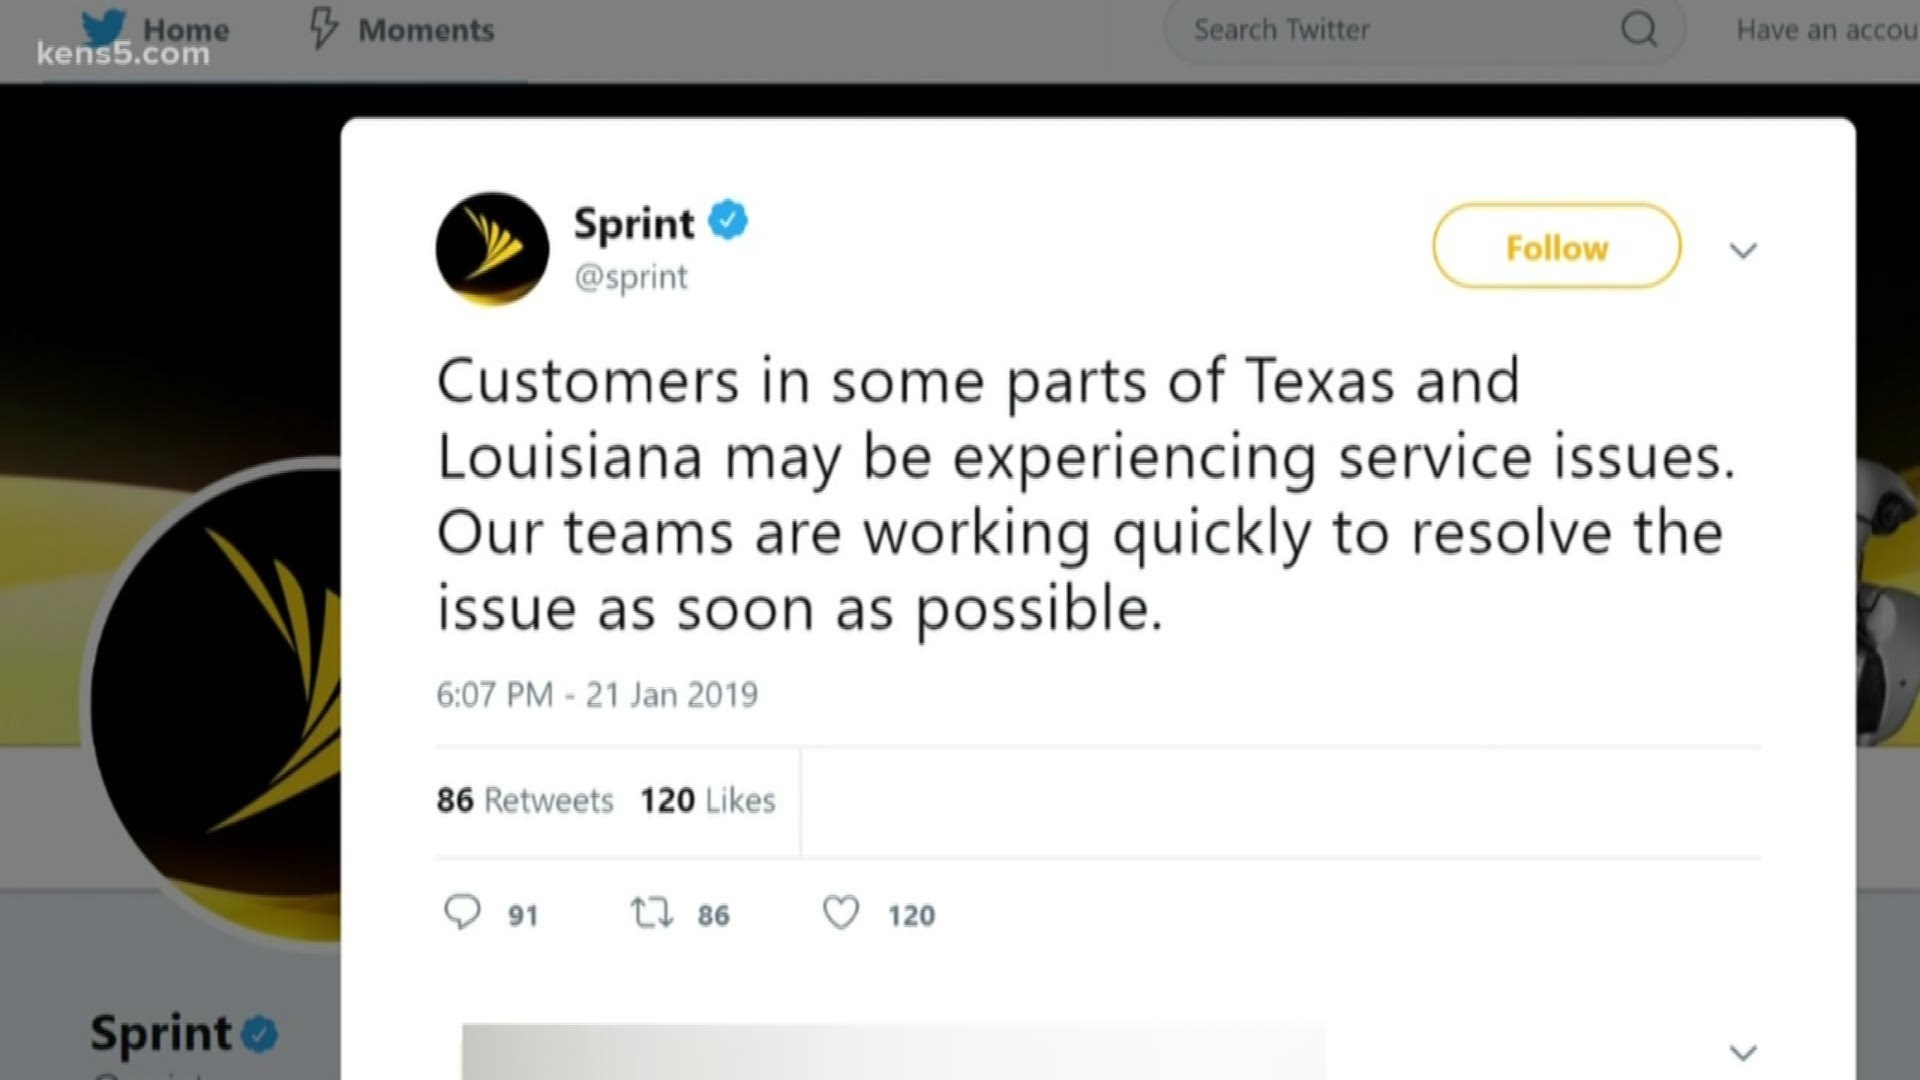 Thousands of residents of Texas and Louisiana who get their cell service from Sprint were experiencing outages Monday night.